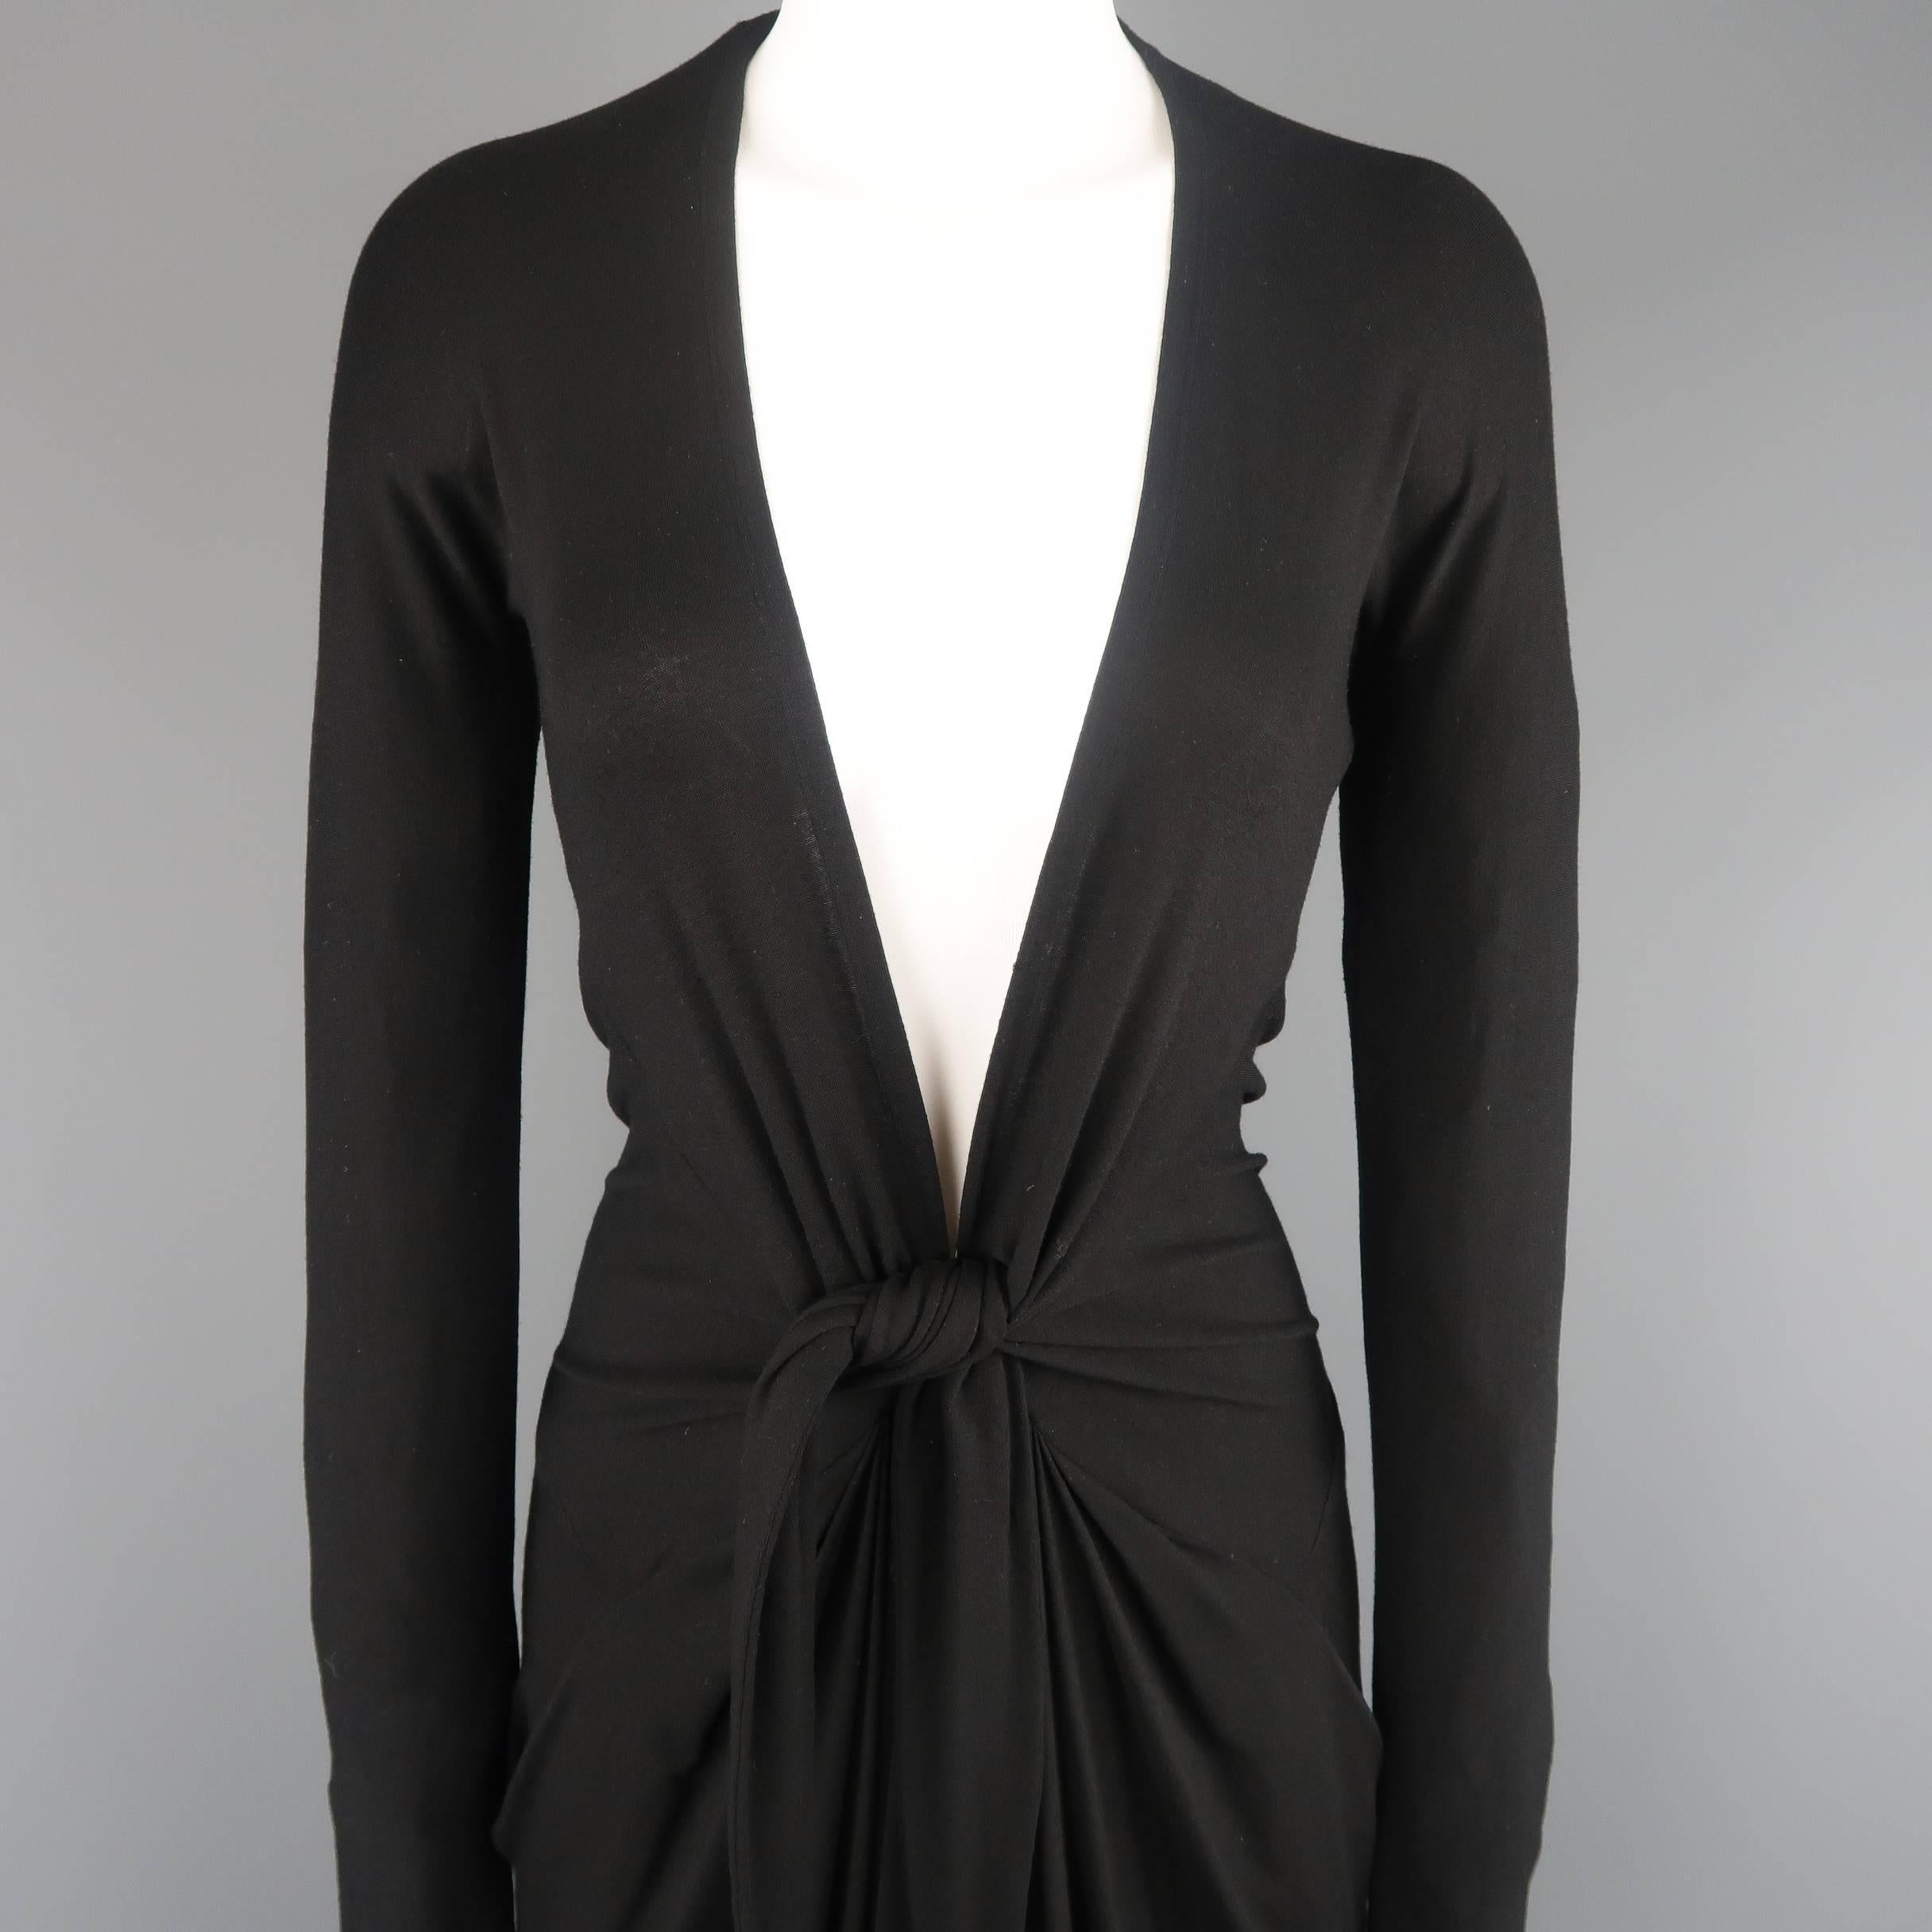 DONNA KARAN shift dress comes in a light weight wool blend jersey knit and features a deep plunge V neck line, long sleeves, and gathered and tied front skirt.
 
Excellent  Pre-Owned Condition.
Marked: M
 
Measurements:
 
Shoulder: 16 in.
Bust: 34